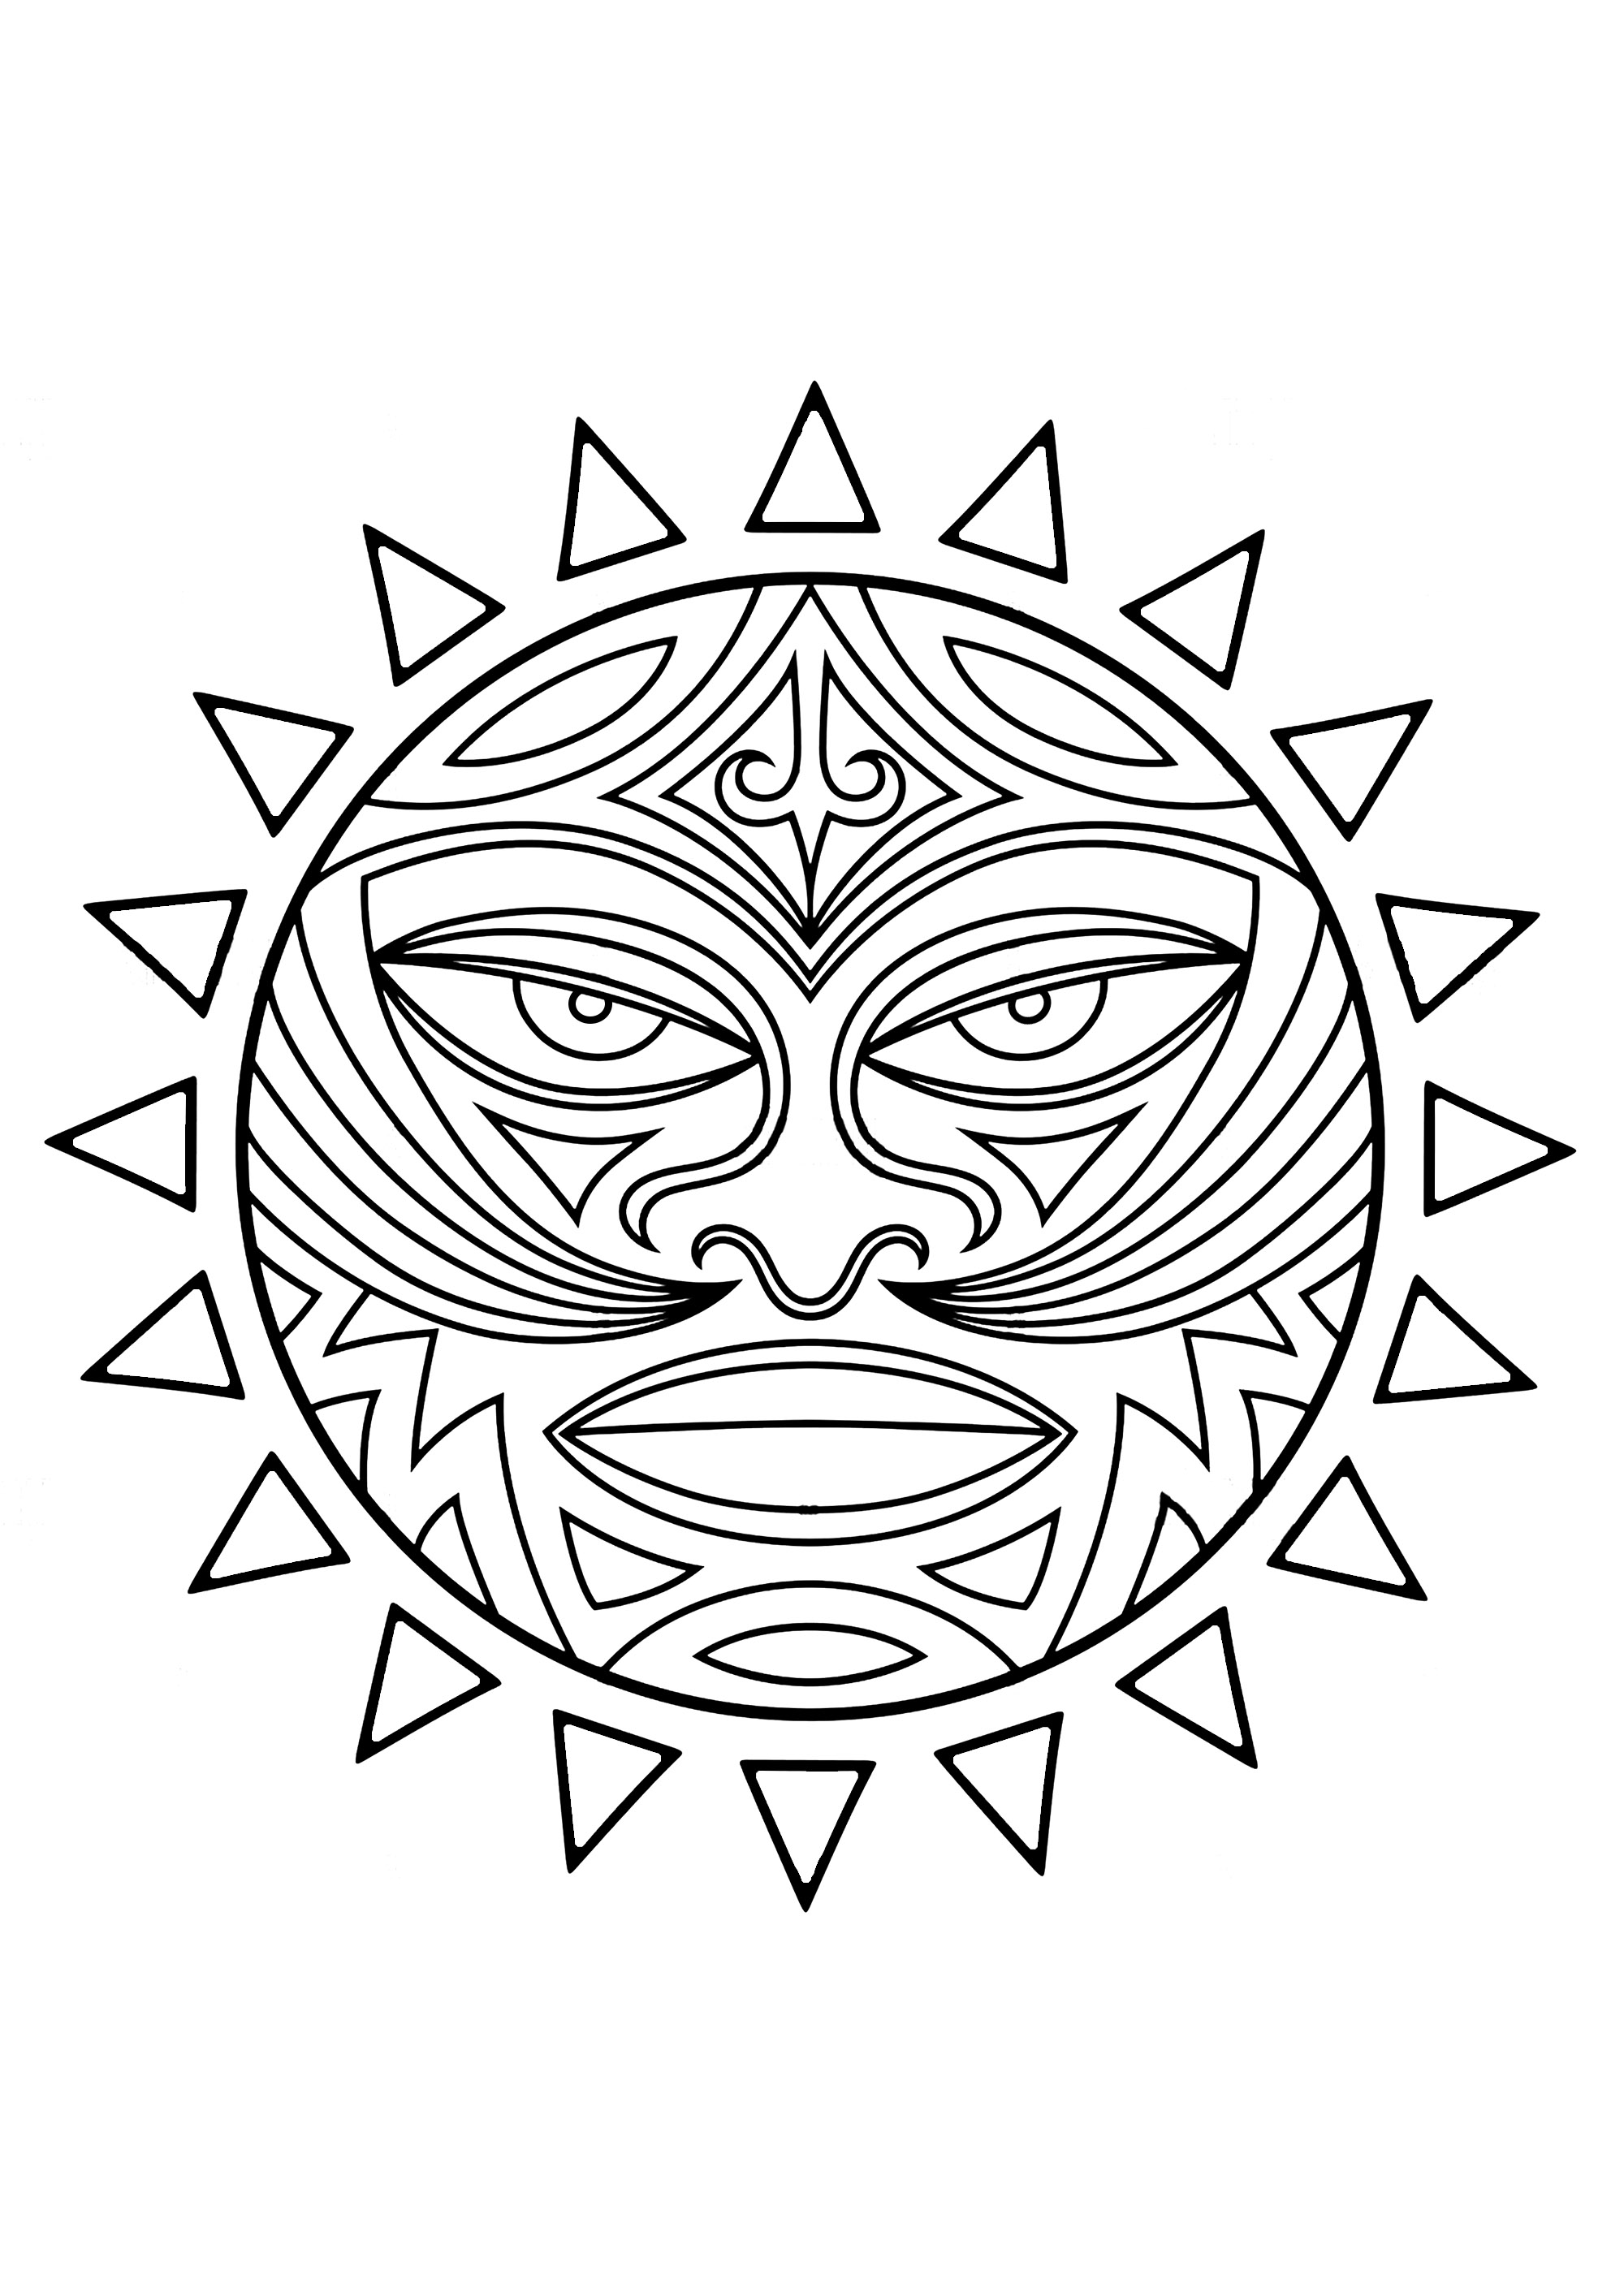 Tiki: Maori / Polynesian symbol. Half-man, half-god, the Tiki symbolizes a mythical figure who, according to the customs and beliefs of the Polynesian peoples, gave birth to human beings. In the past, Polynesians venerated and feared them. This representation in the form of a face in a circle can be the subject of a Maori tattoo.